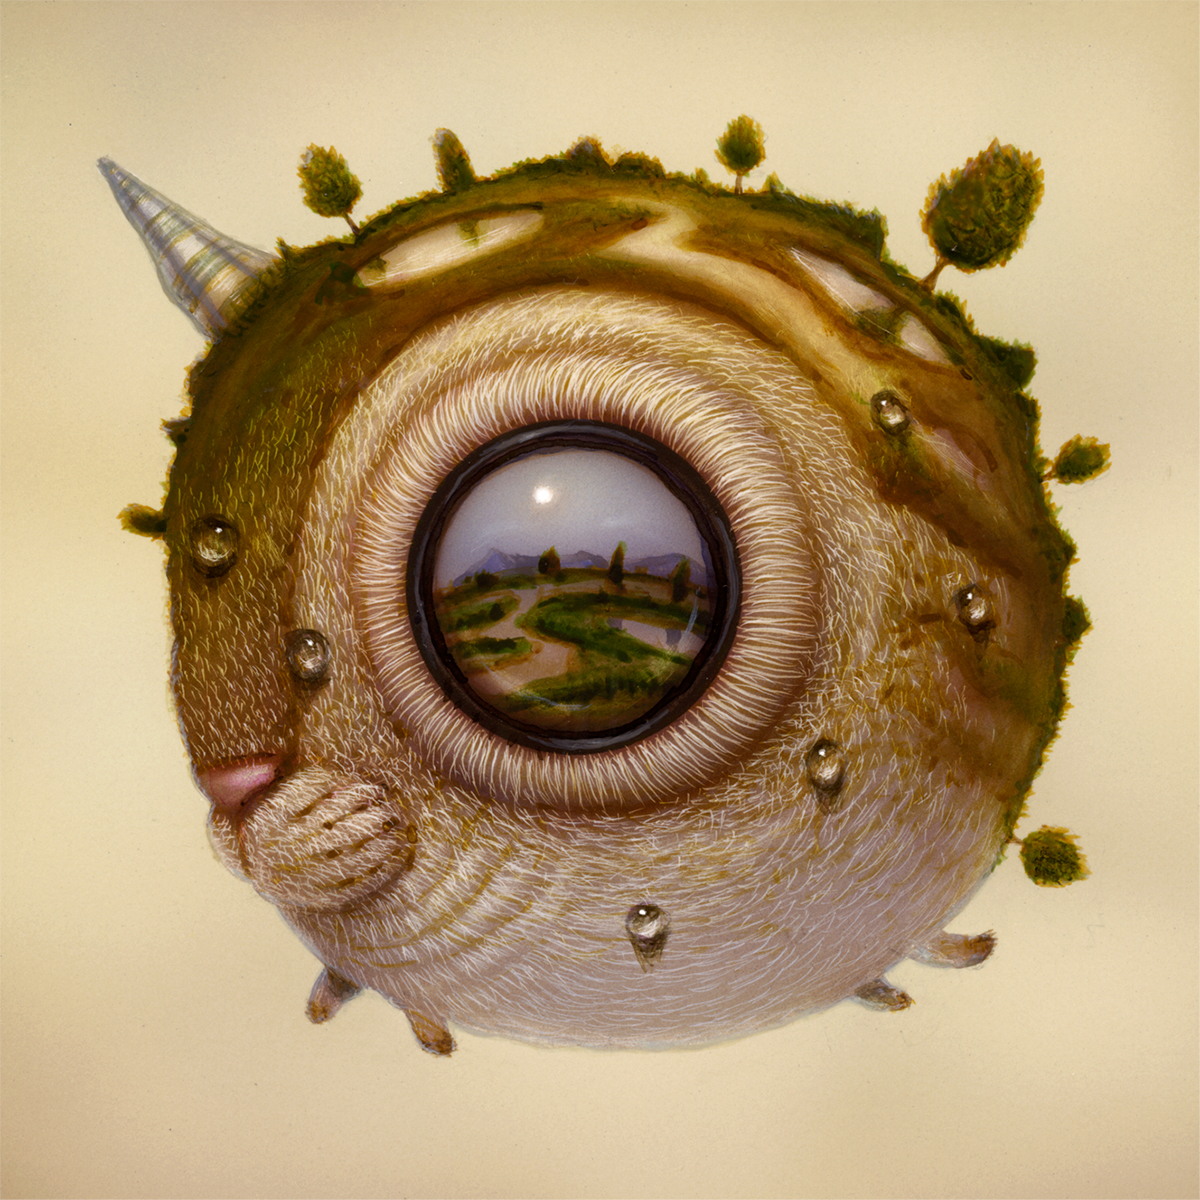 Hybrid Creatures with Oversized Eyes Reflect Imagined Landscapes in Surreal Paintings by Haoto Nattori